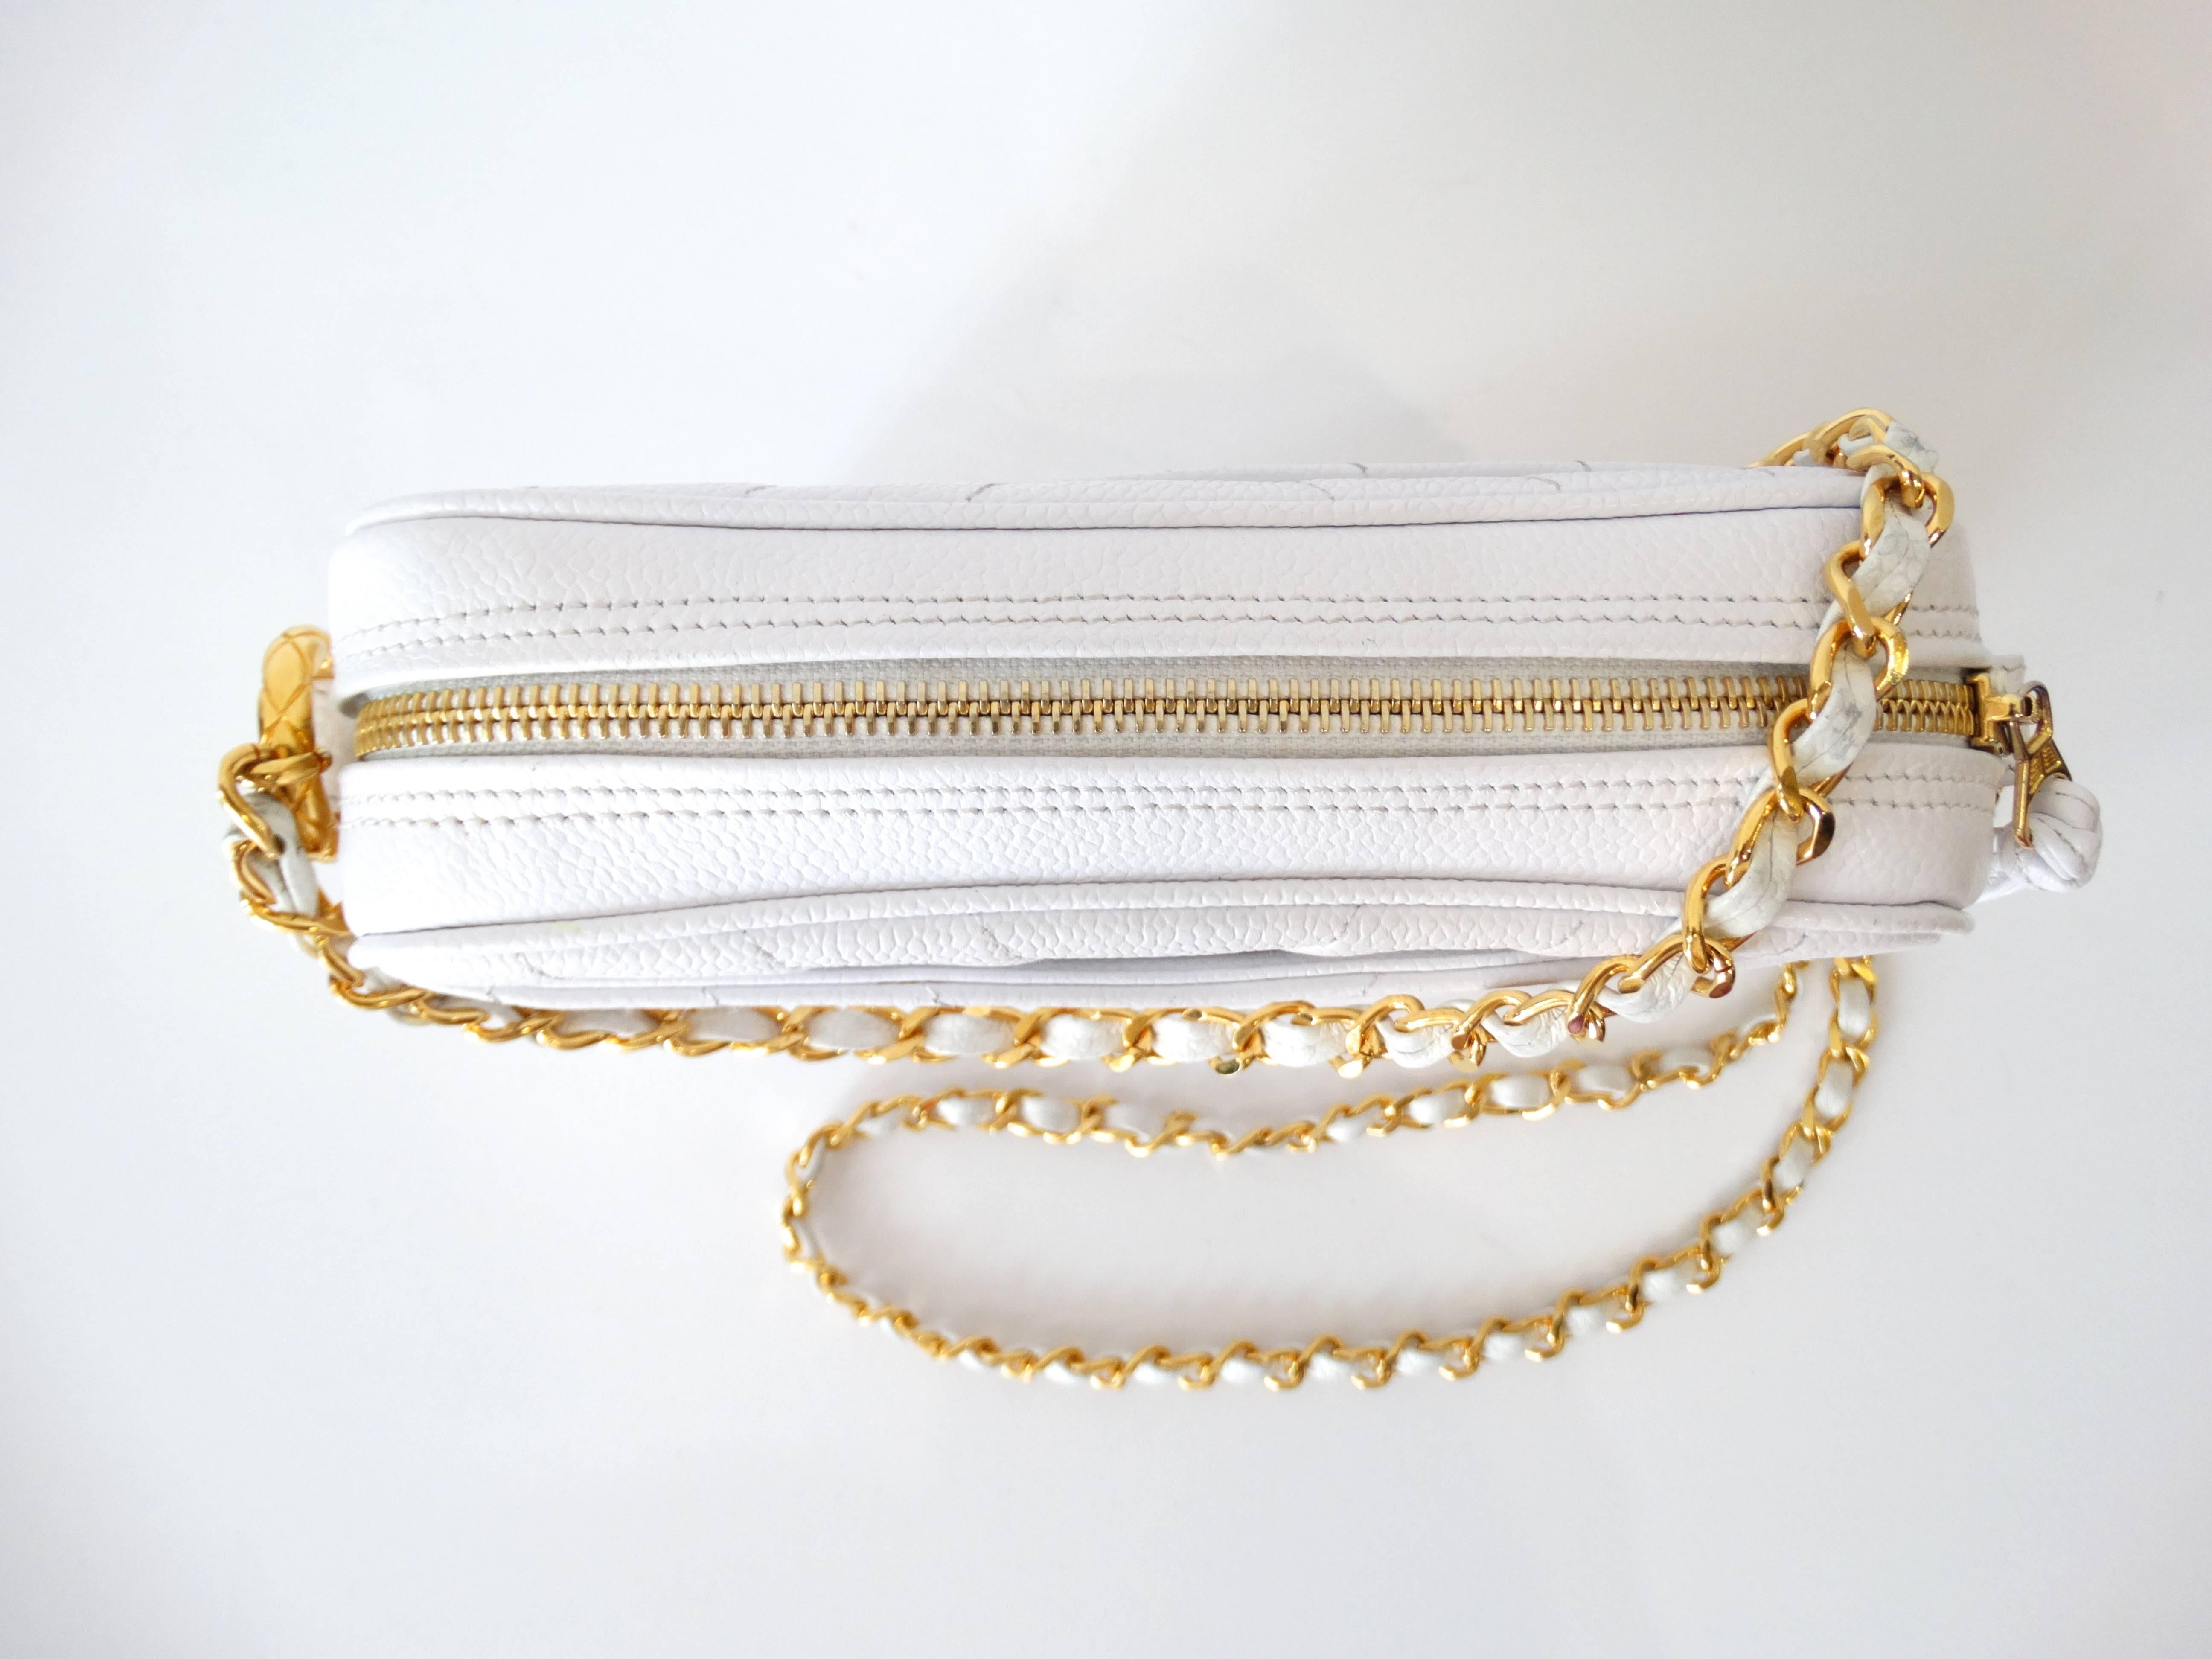 Is there anything more classic than a Chanel bag? Incredible textured caviar leather in an icy white color. Signature Chanel stitching in a unique Chevron pattern. 23” Long cross-body chain in brilliant gold metal with matching white leather. Two